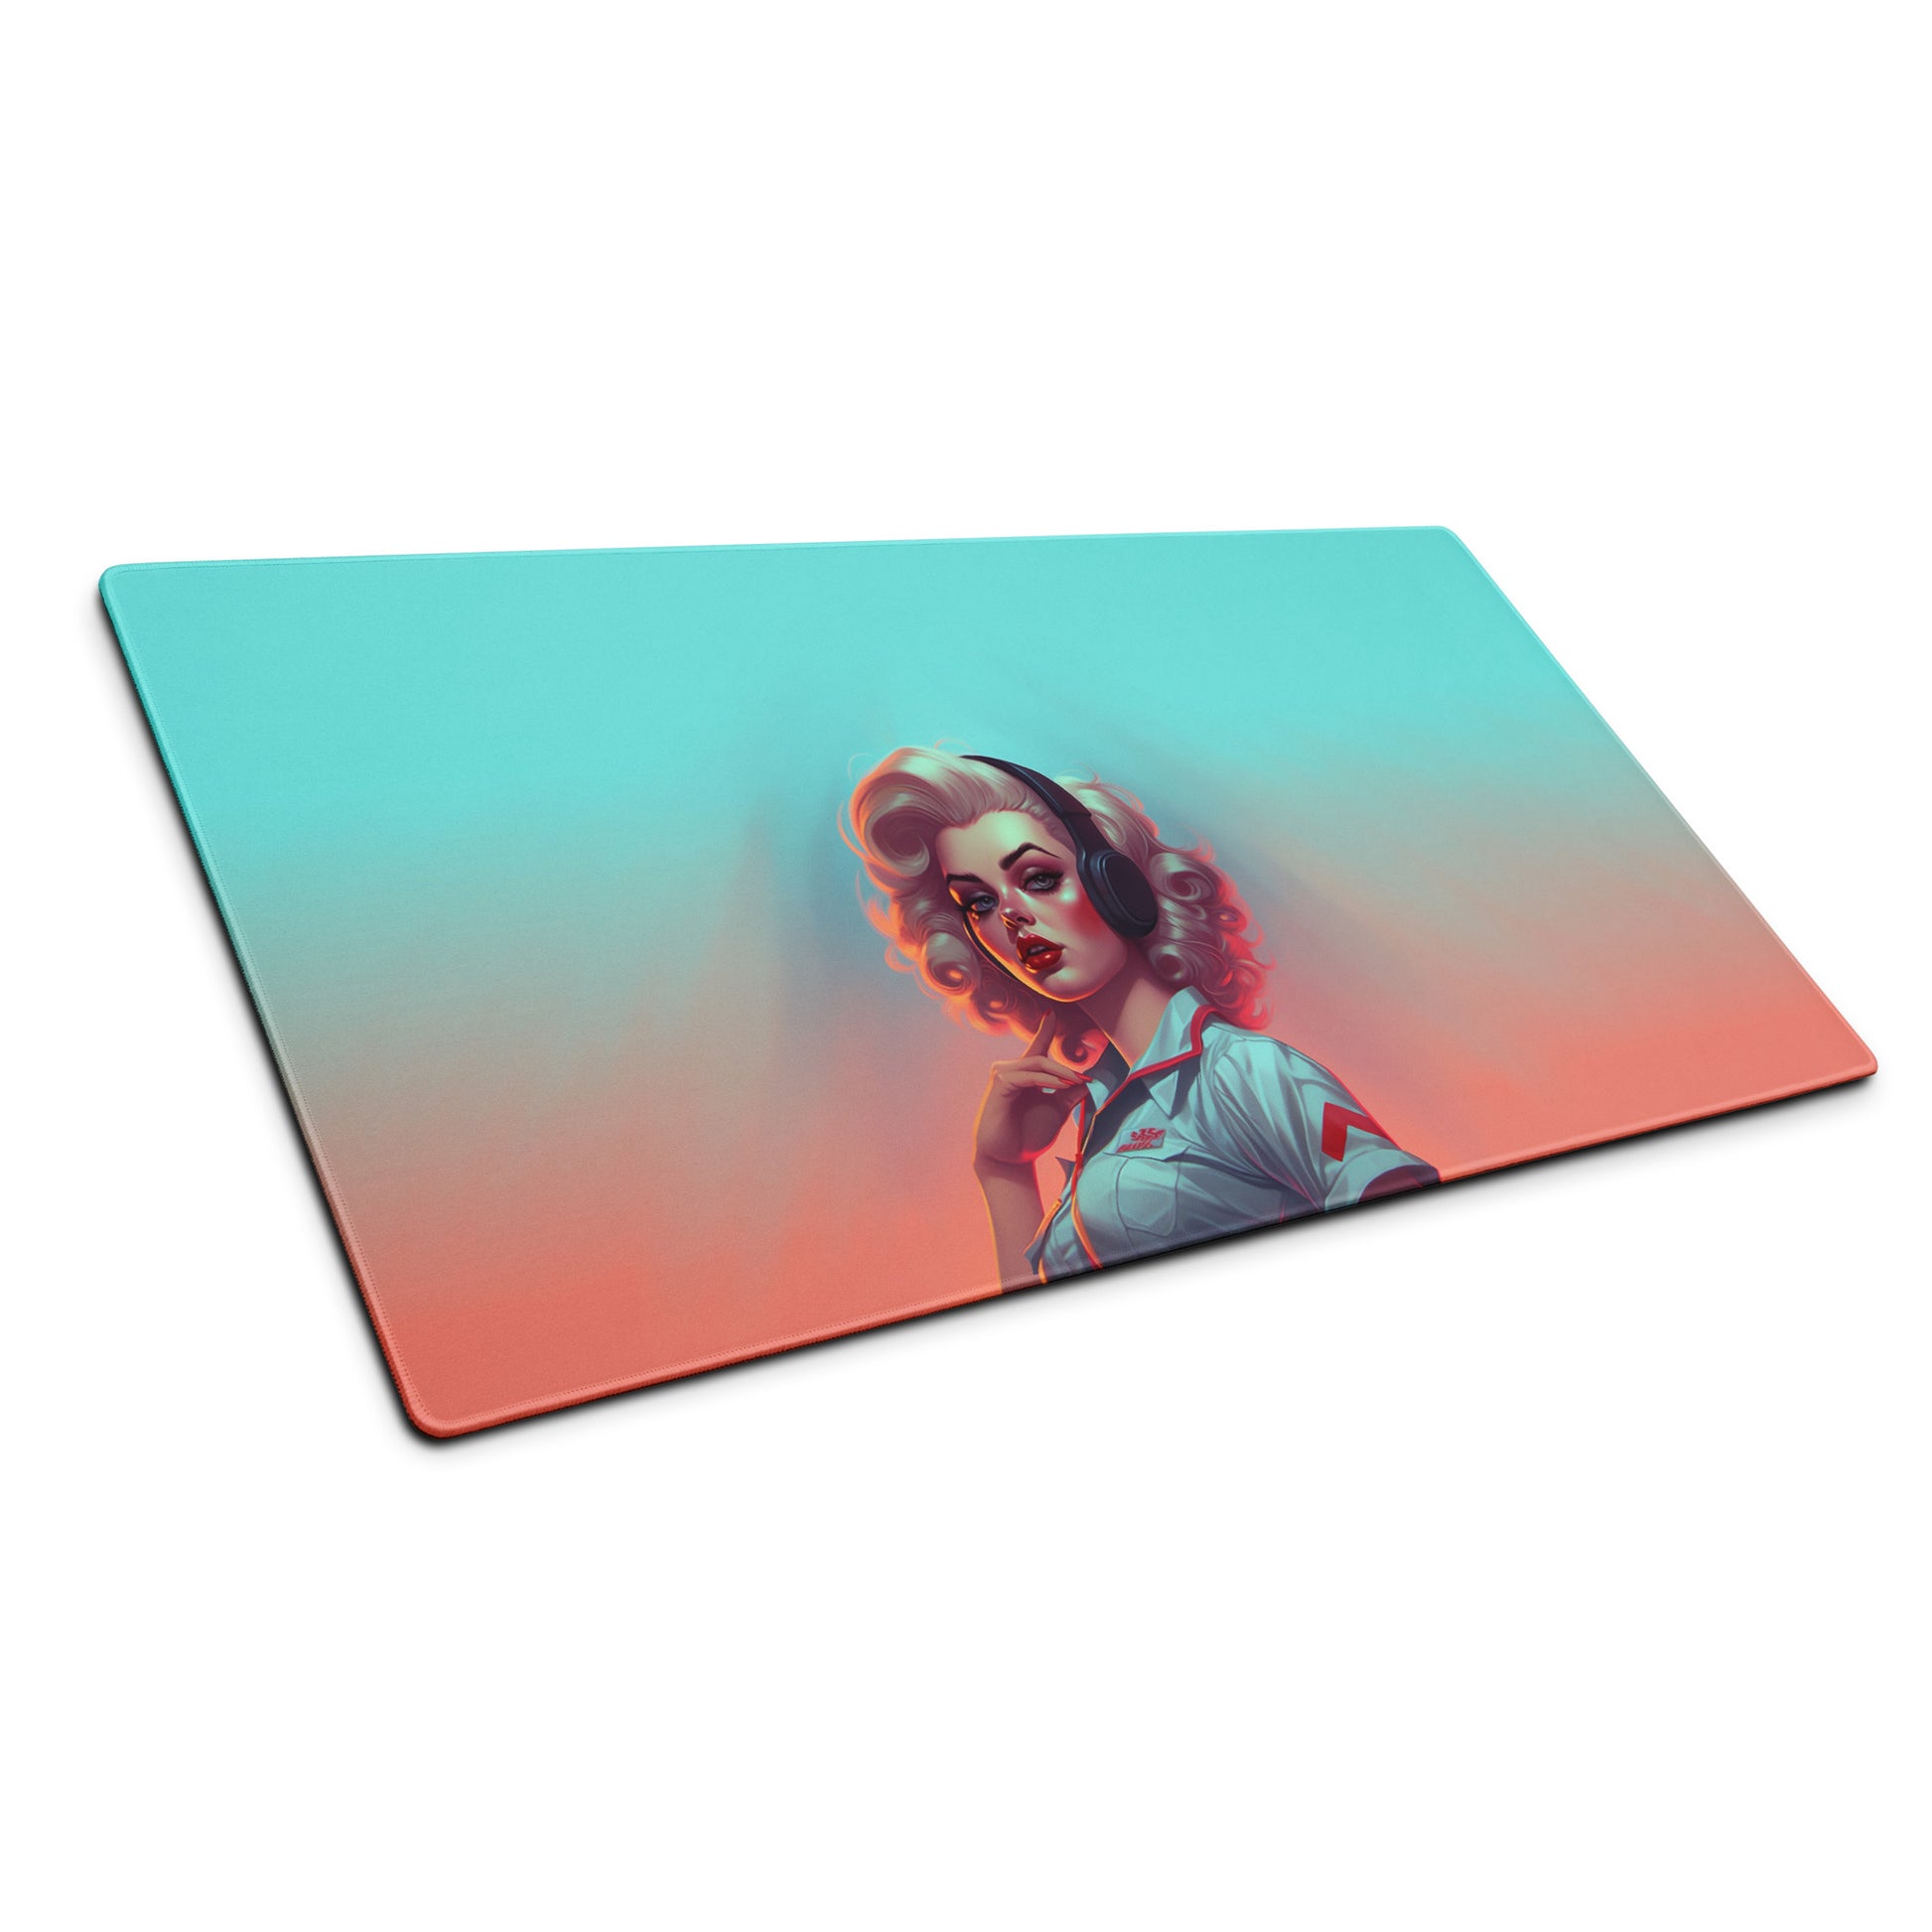 A 36" x 18" blue and orange desk pad with a flight attendant sitting at an angle.